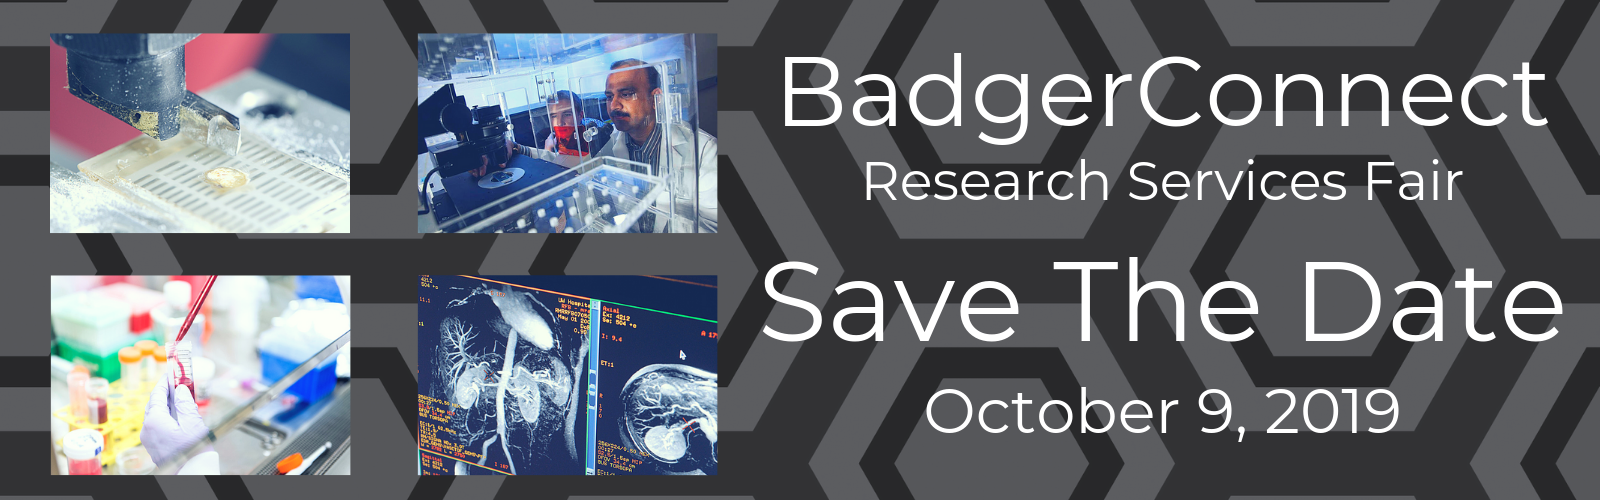 BadgerConnect 2019 Save the Date Announcement